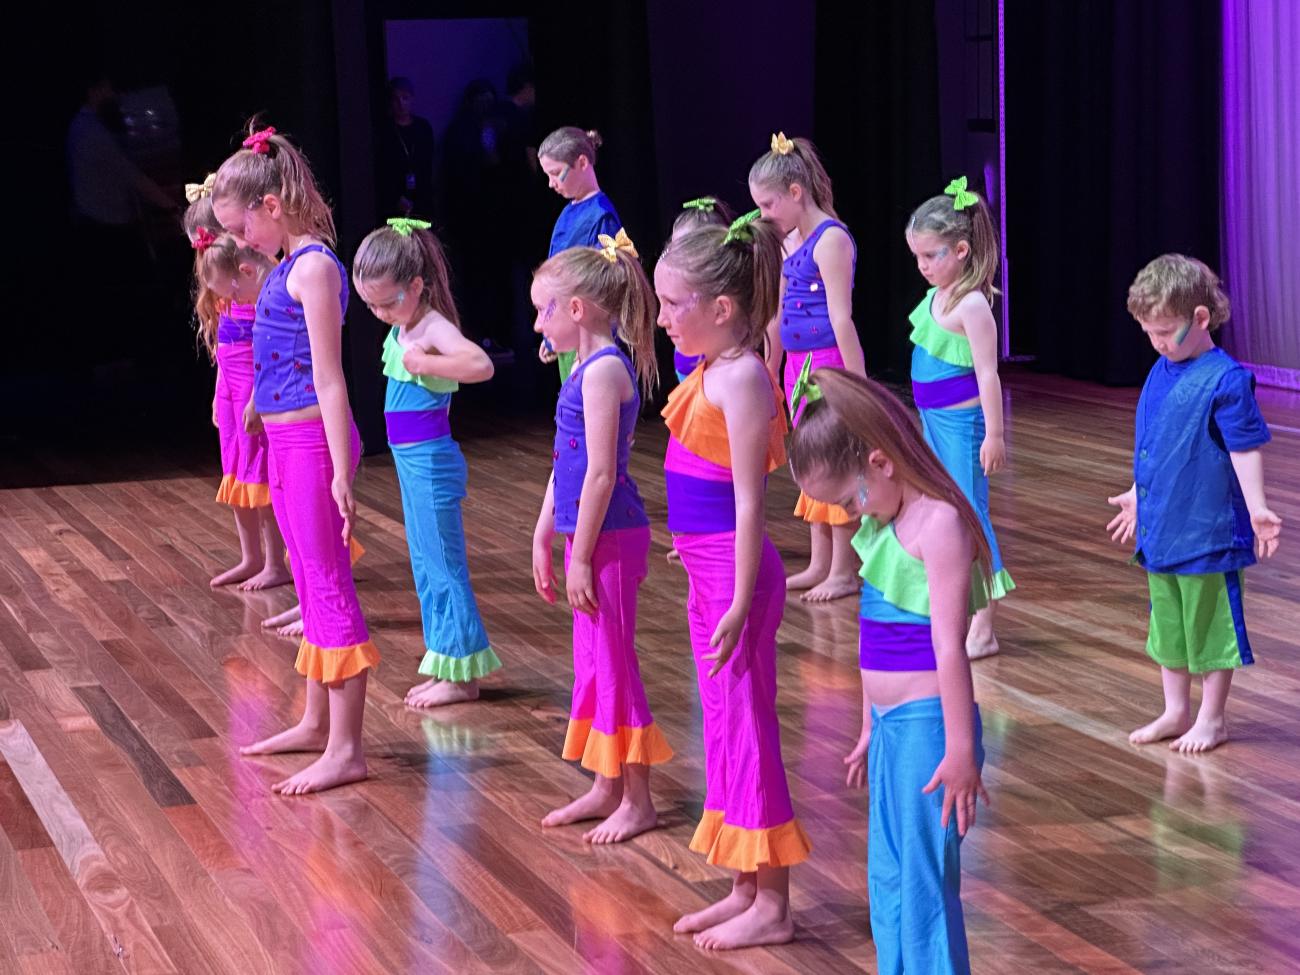 group of young dancers on stage in pink and blue costumes